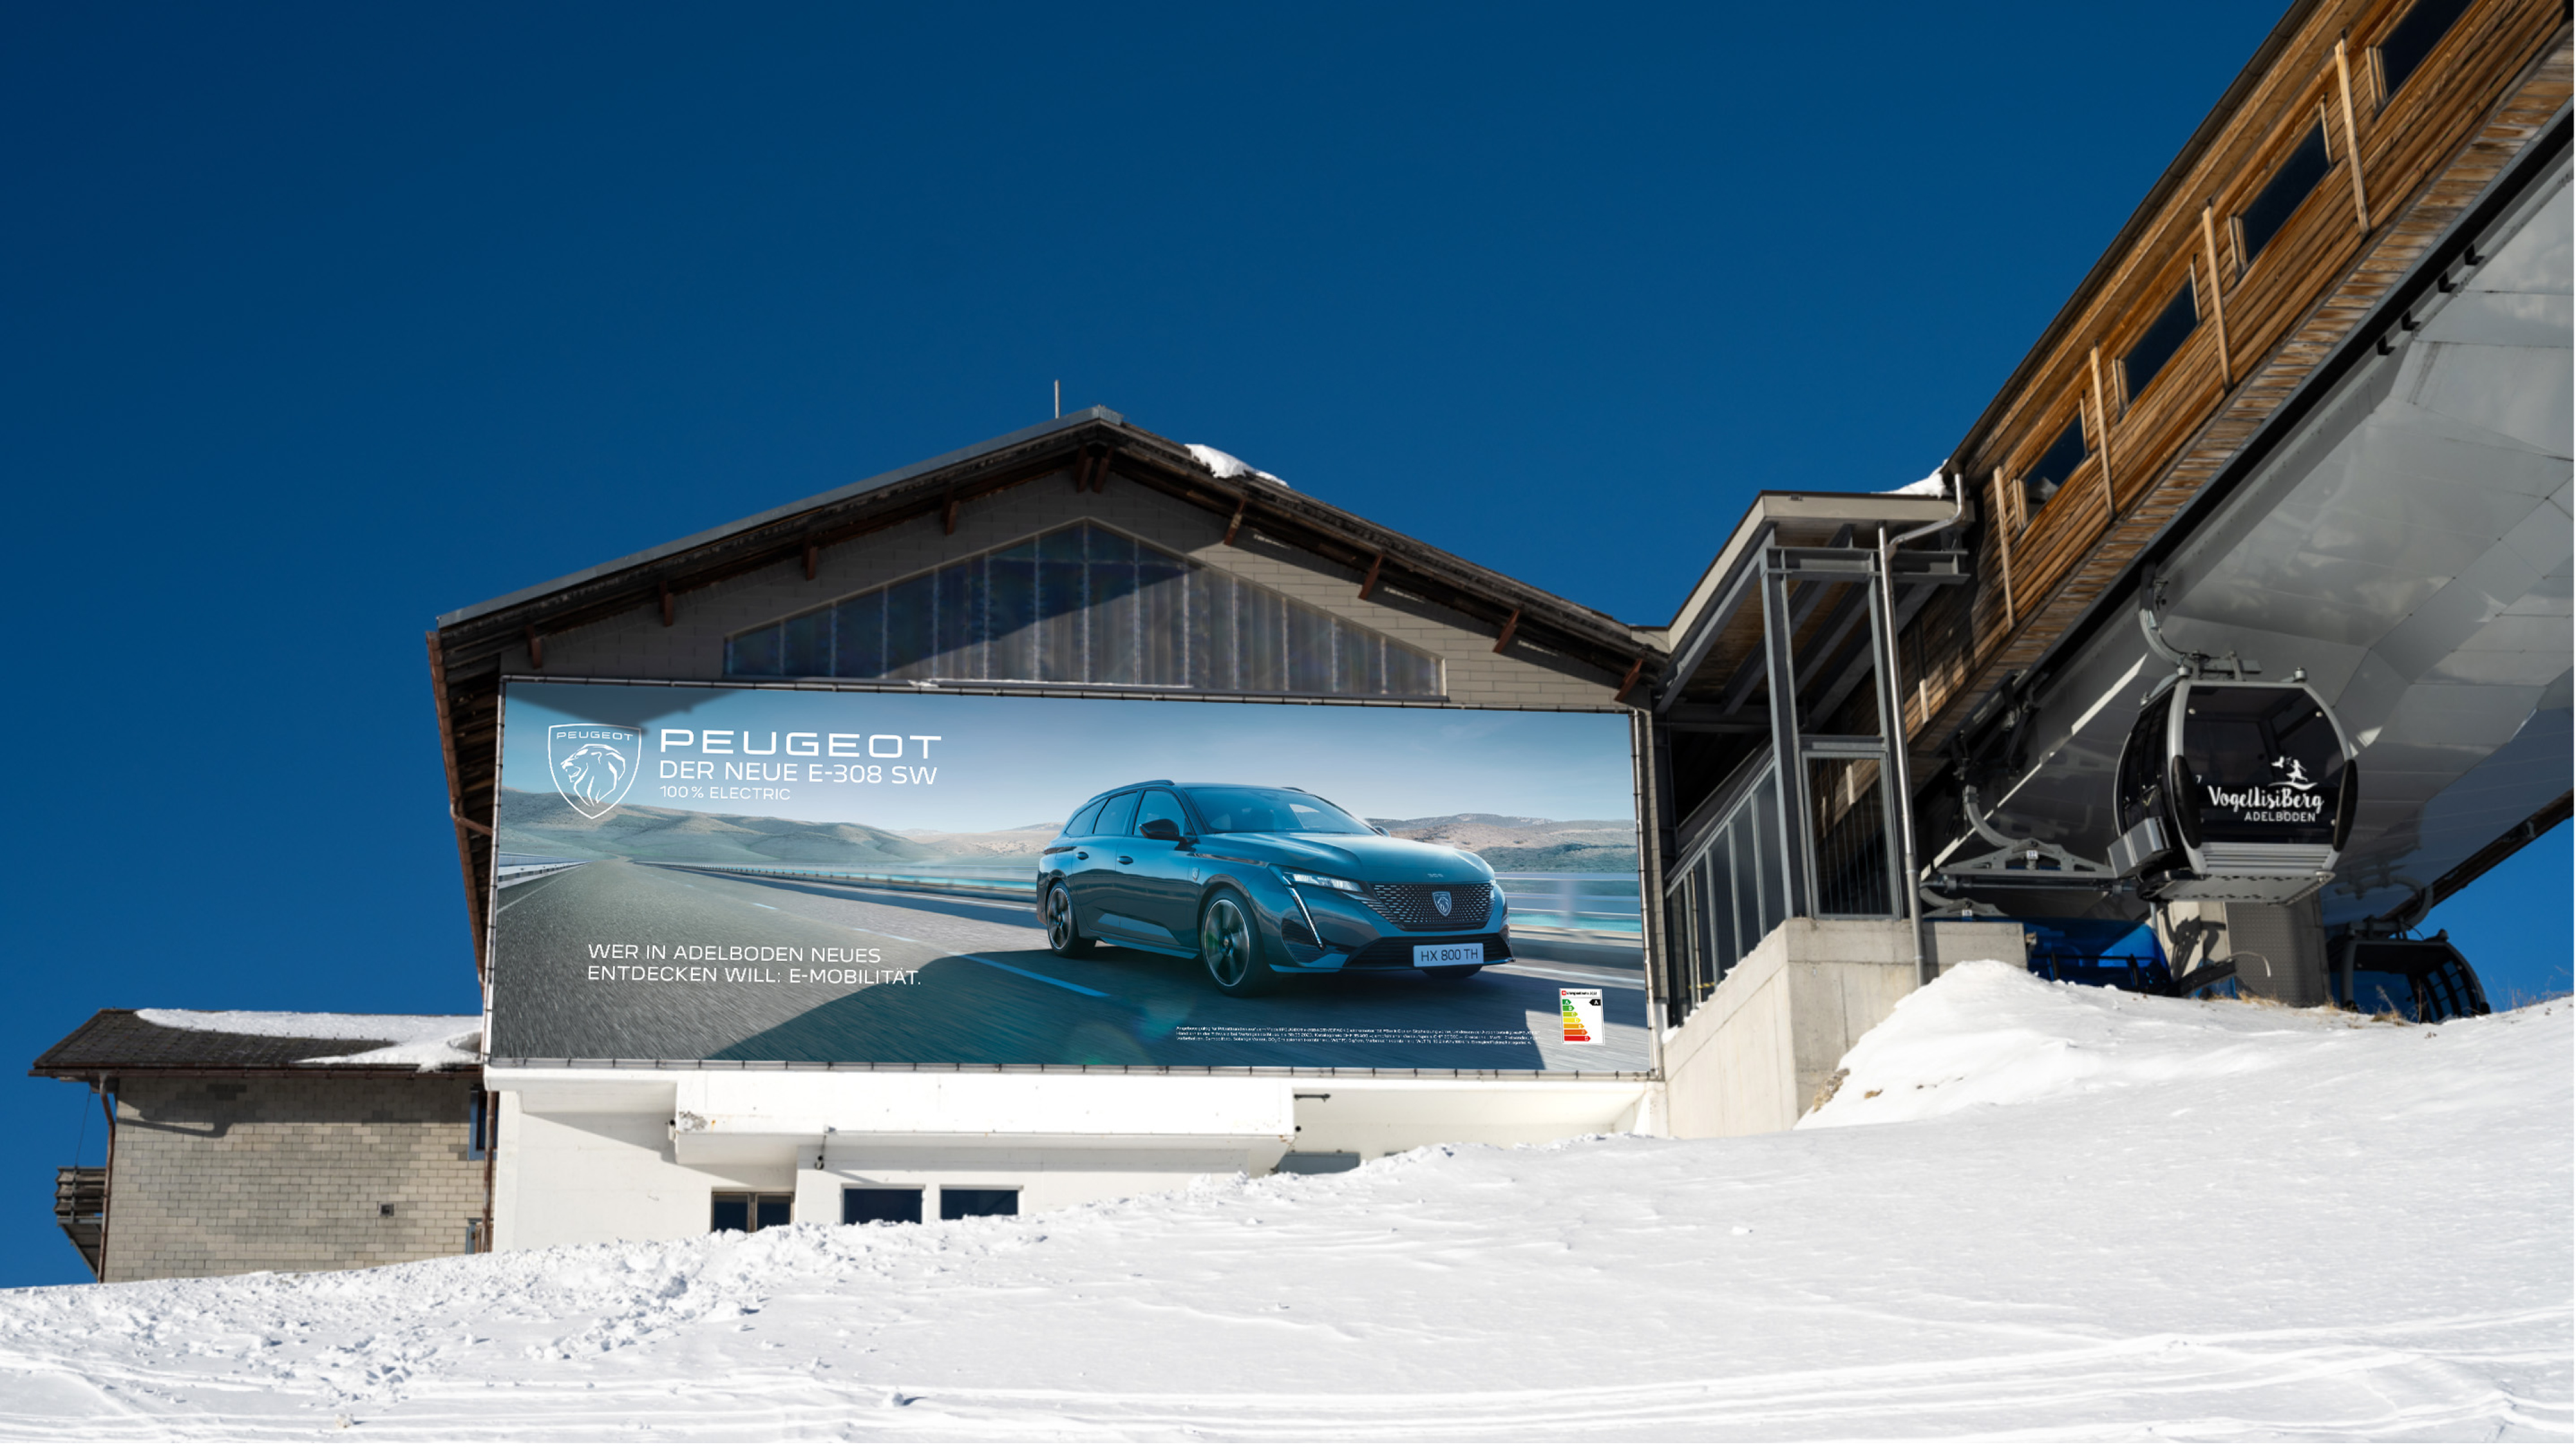 A picture of a Peugeot E-308 AD on the side of a ski lift building